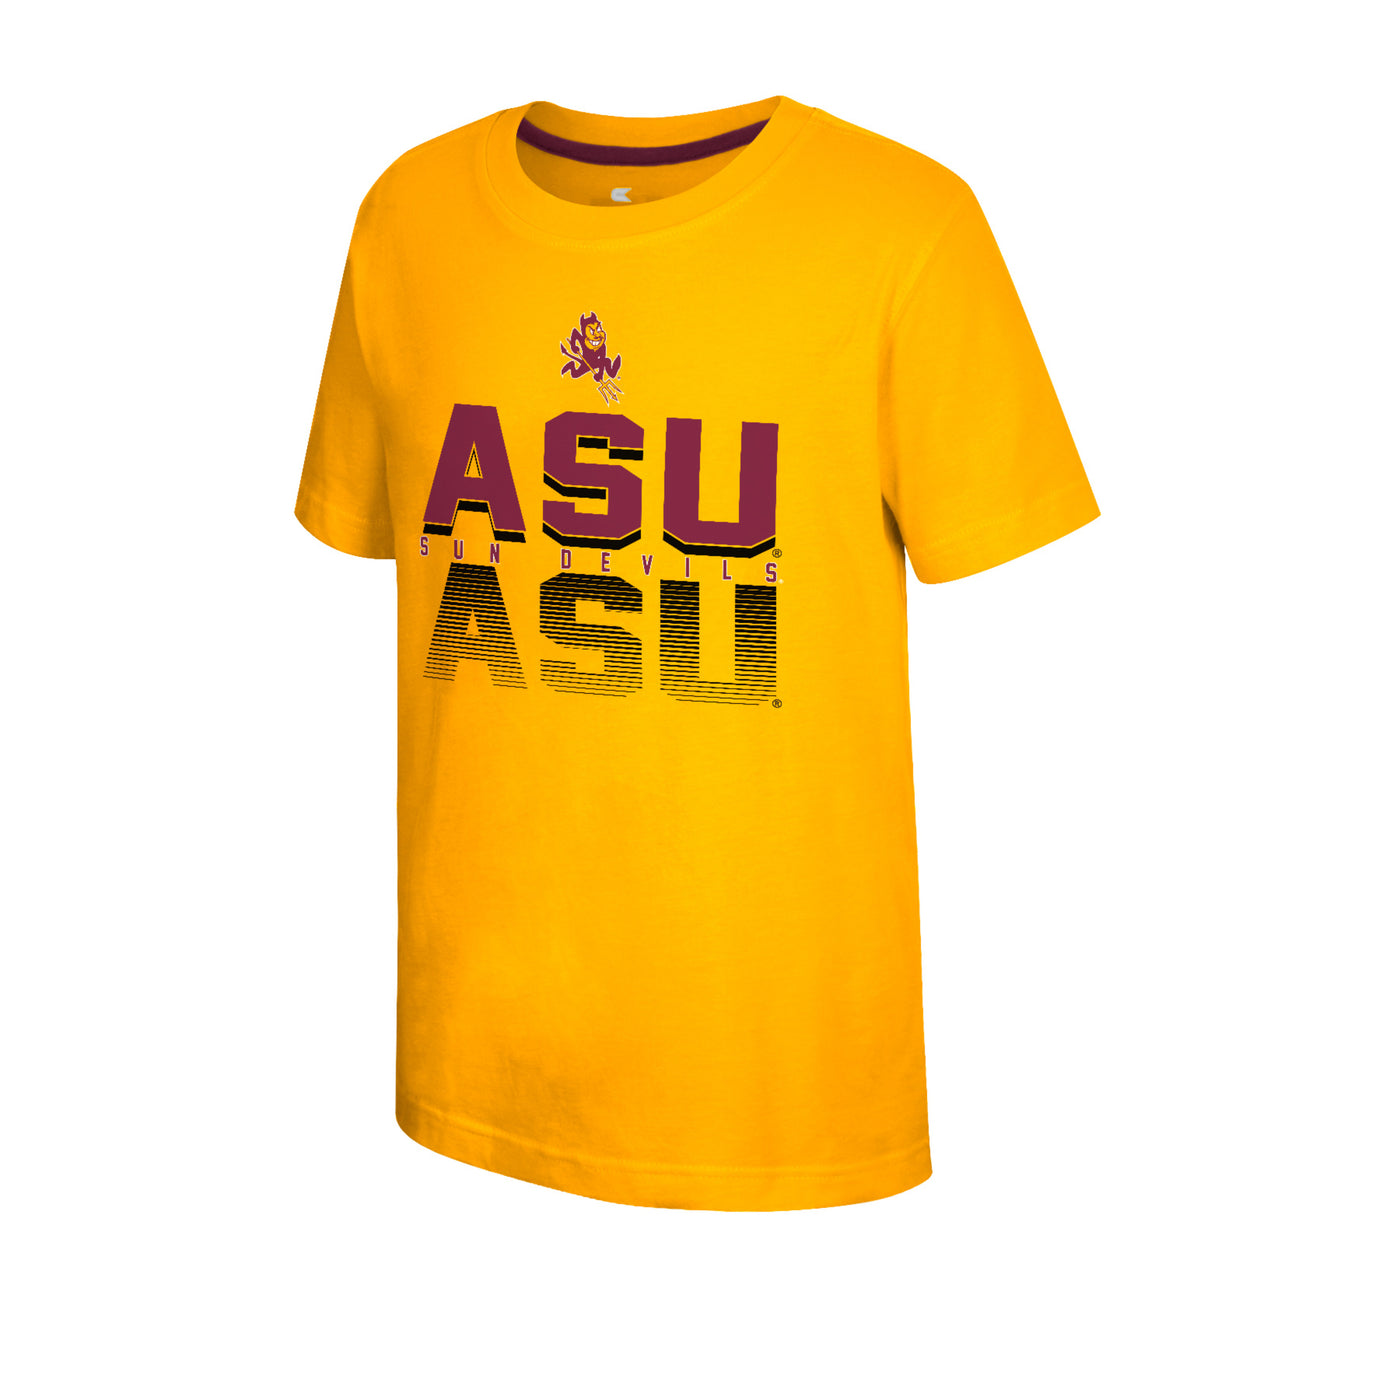 ASU gold youth t-shirts with the text 